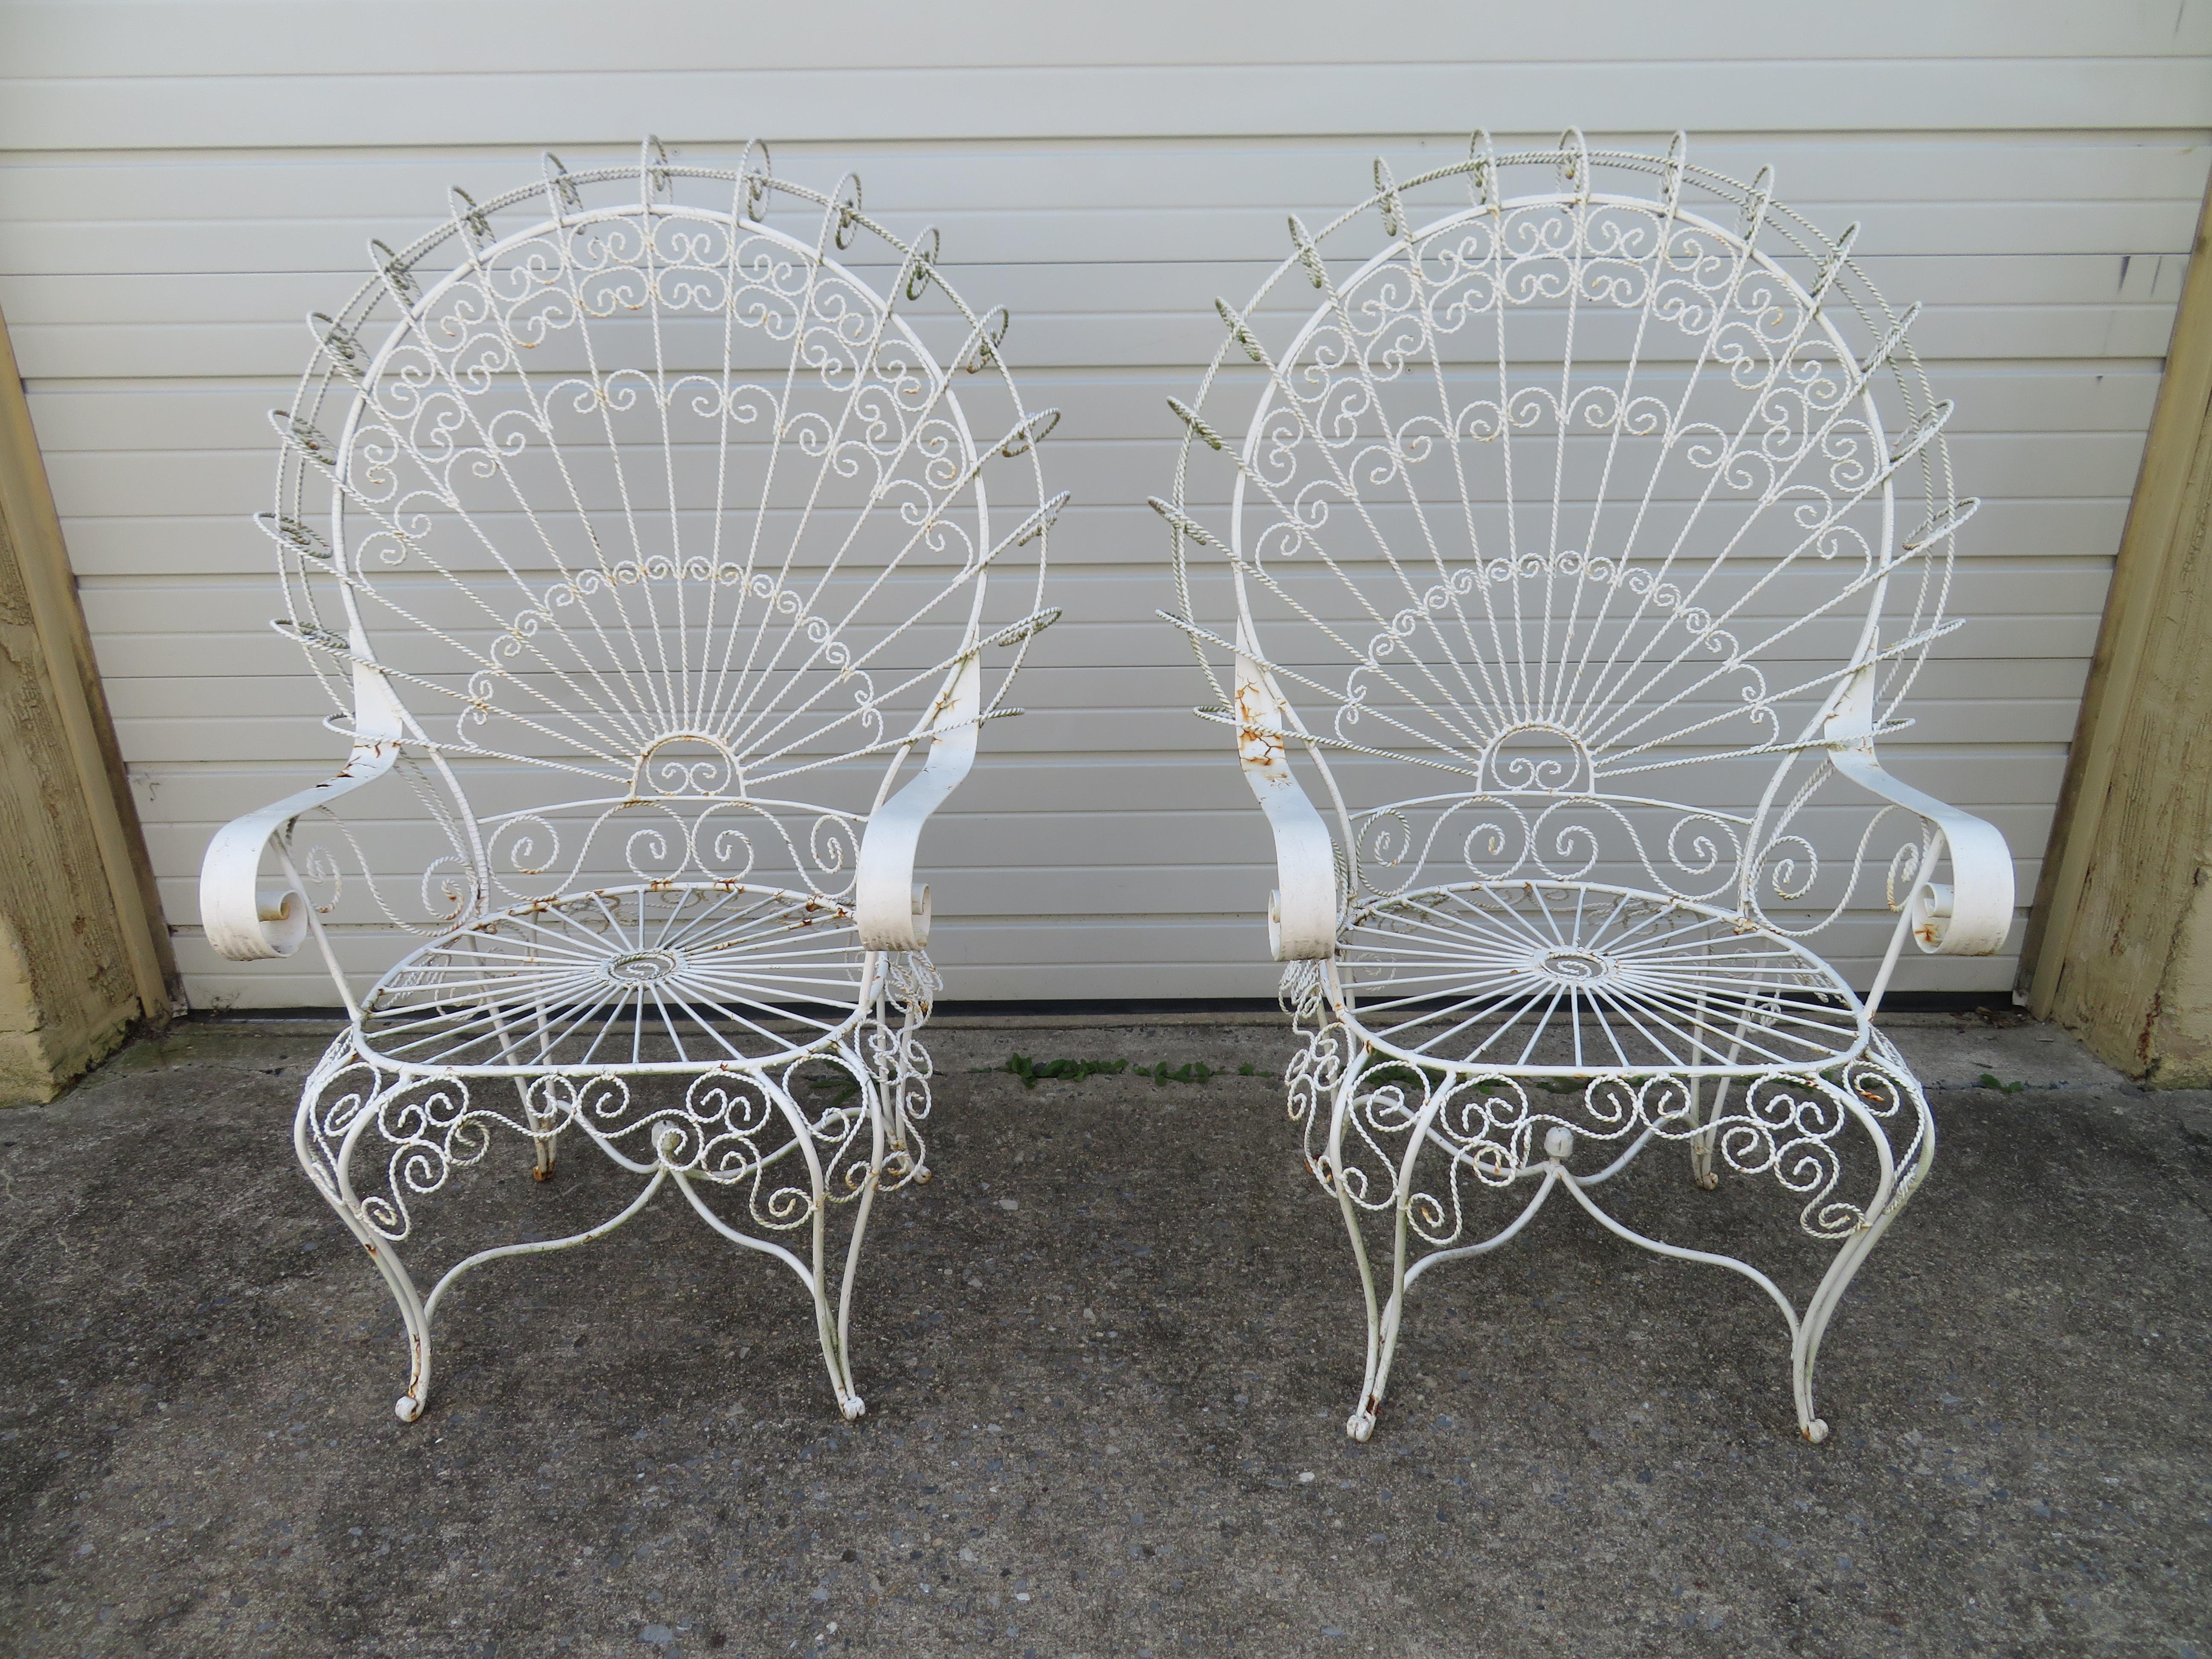 Gorgeous pair of Salterini style ornate wrought iron twisted wire fan back patio chairs. This pair is in vintage condition retaining their original white finish-shows wear to arms. There are no cracks or breaks to the frames-sturdy.